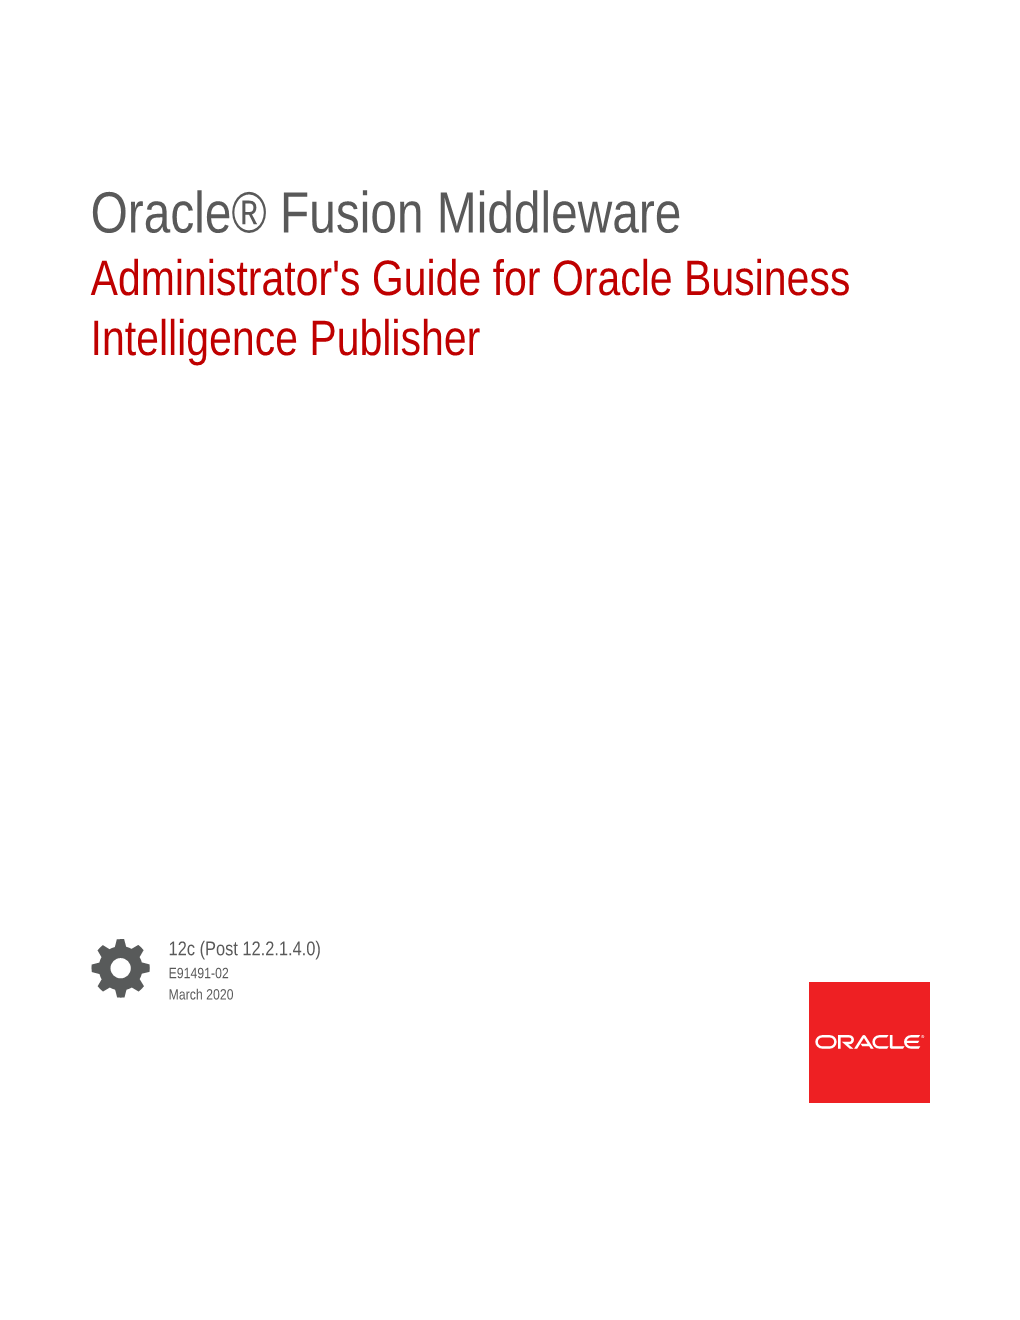 Administrator's Guide for Oracle Business Intelligence Publisher